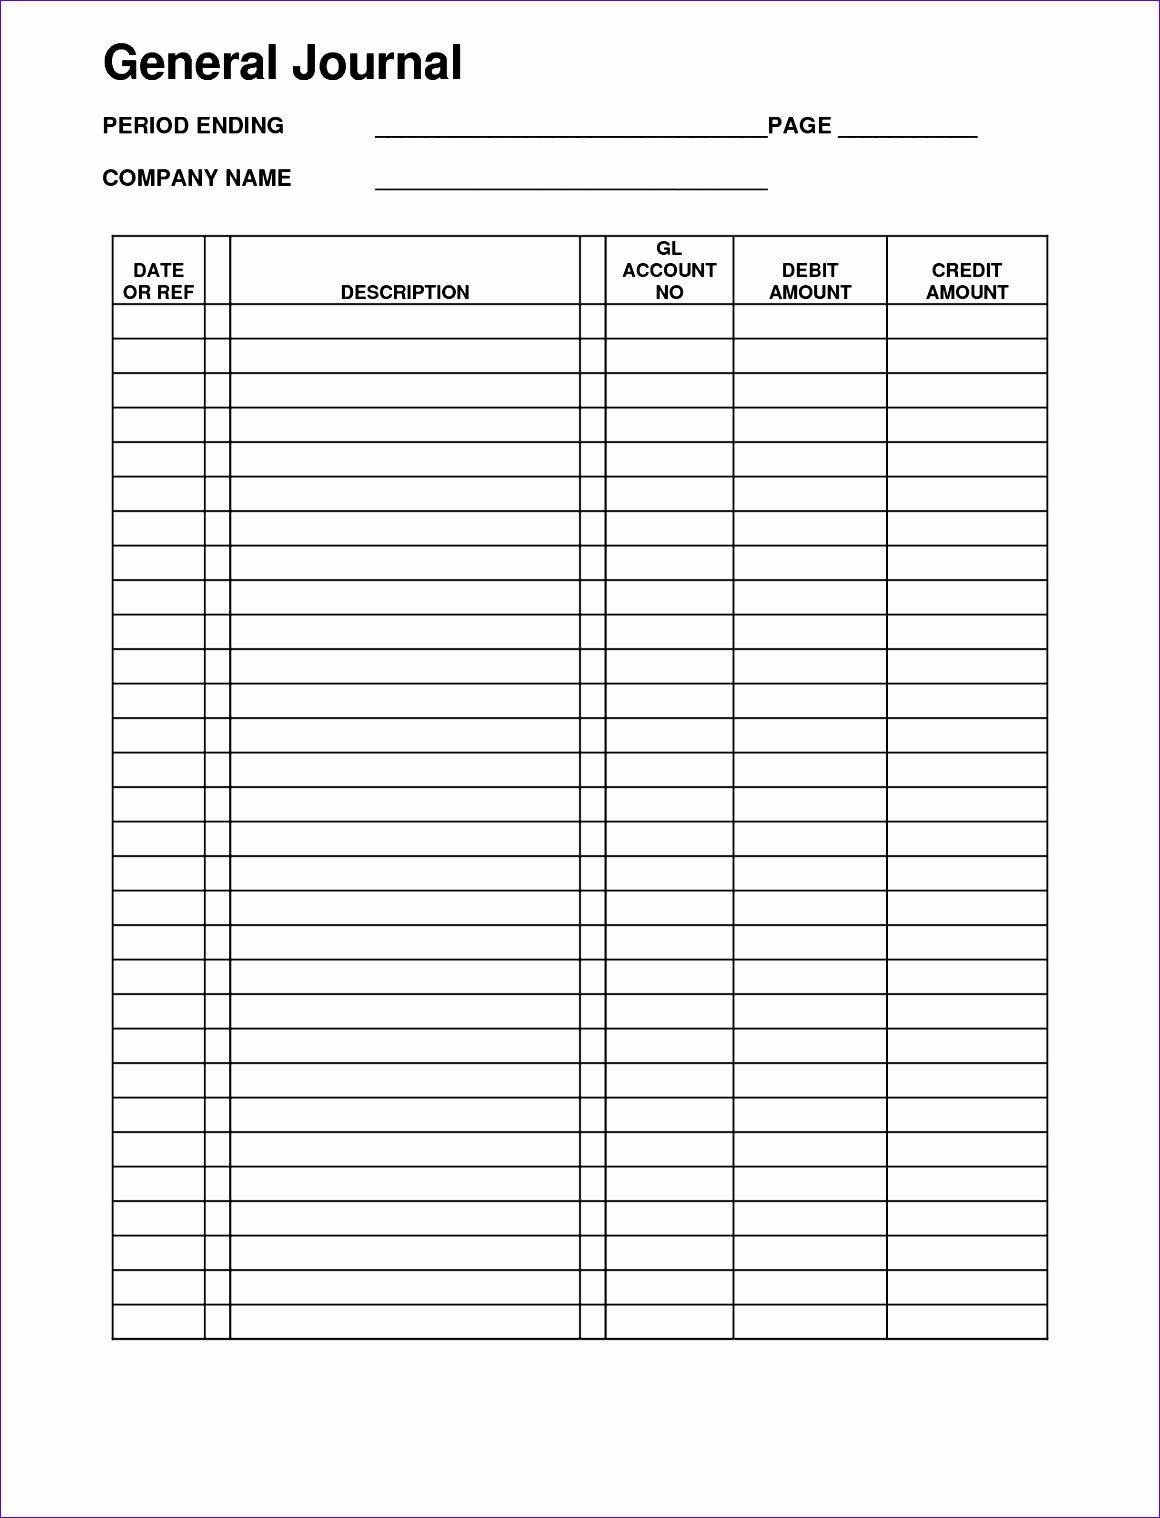 14 General Journal Excel Template - Excel Templates